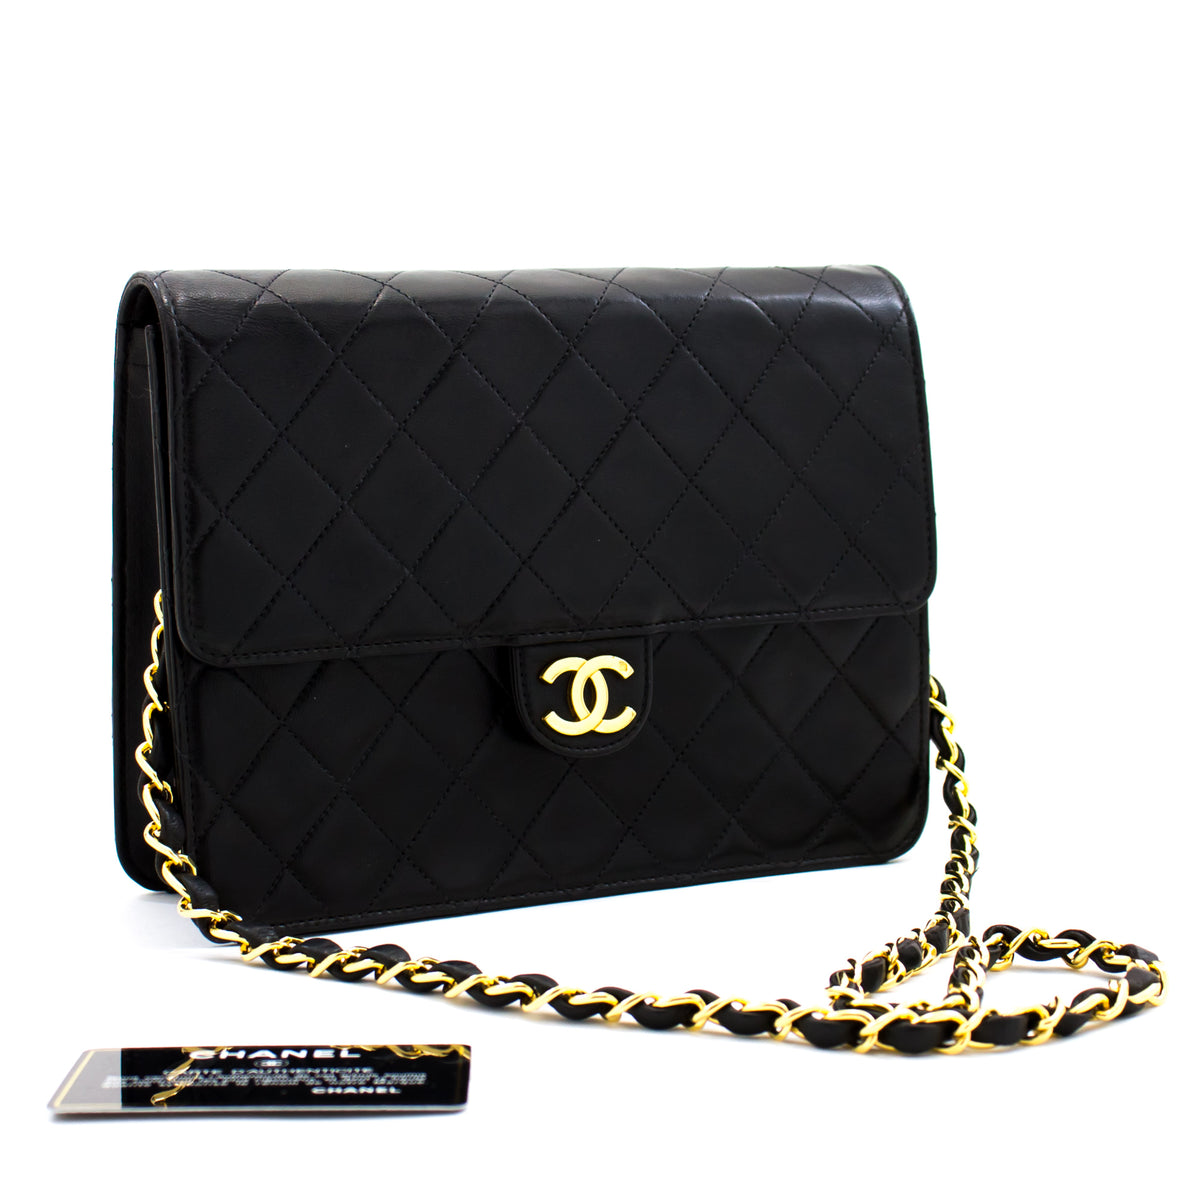 CHANEL Small Chain Shoulder Bag Clutch Black Quilted Flap